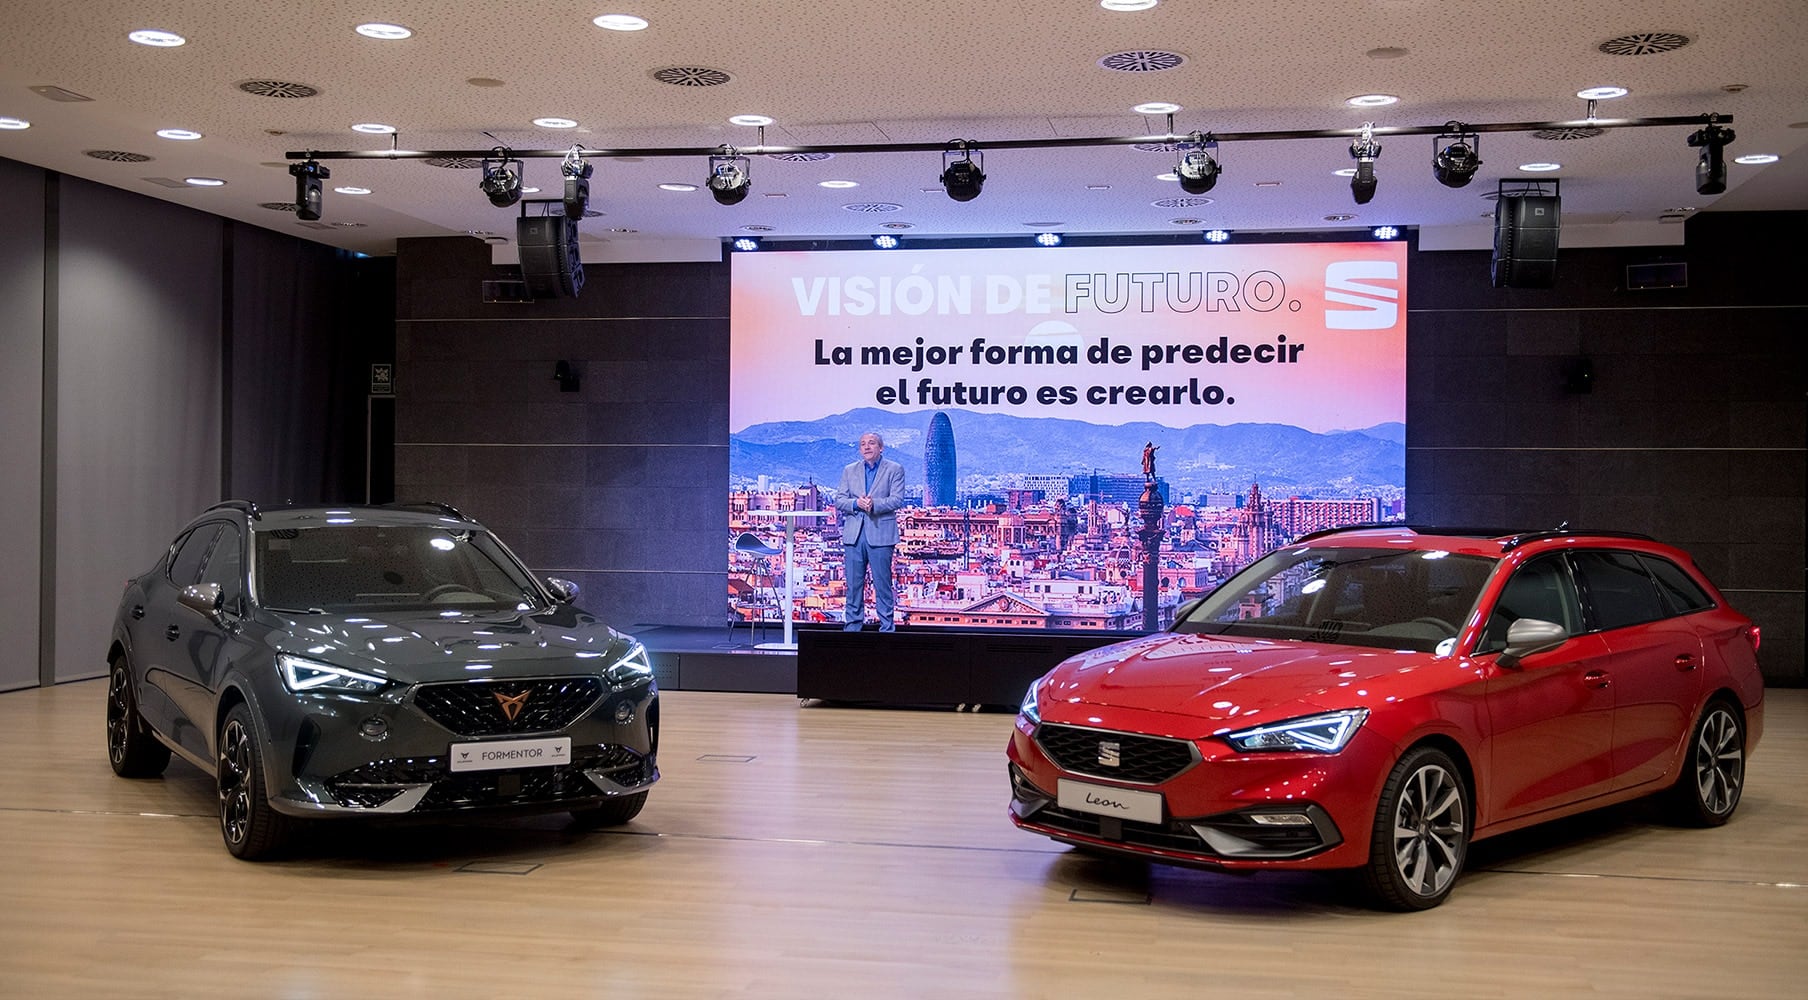 SEAT presents its strategy for the future to major suppliers in Spain.